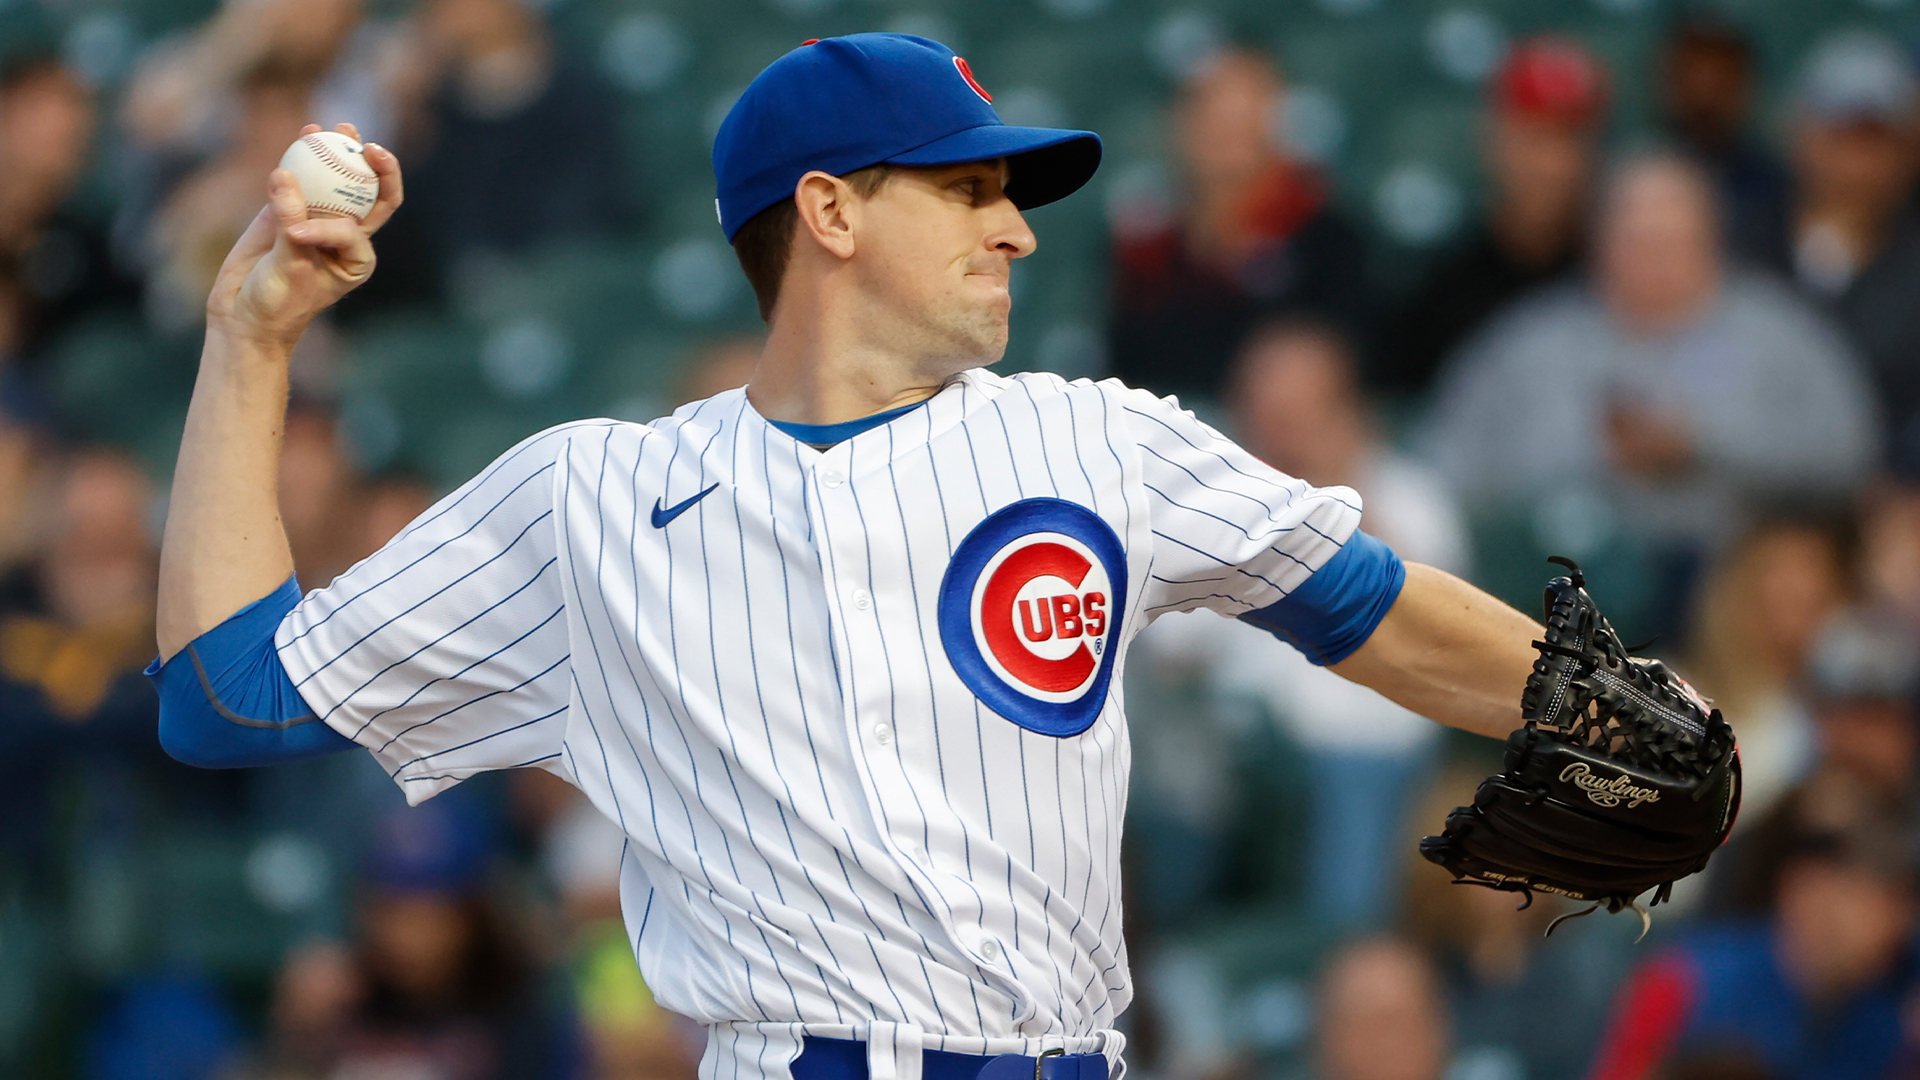 Chicago Cubs starter Kyle Hendricks pitching as well as anyone